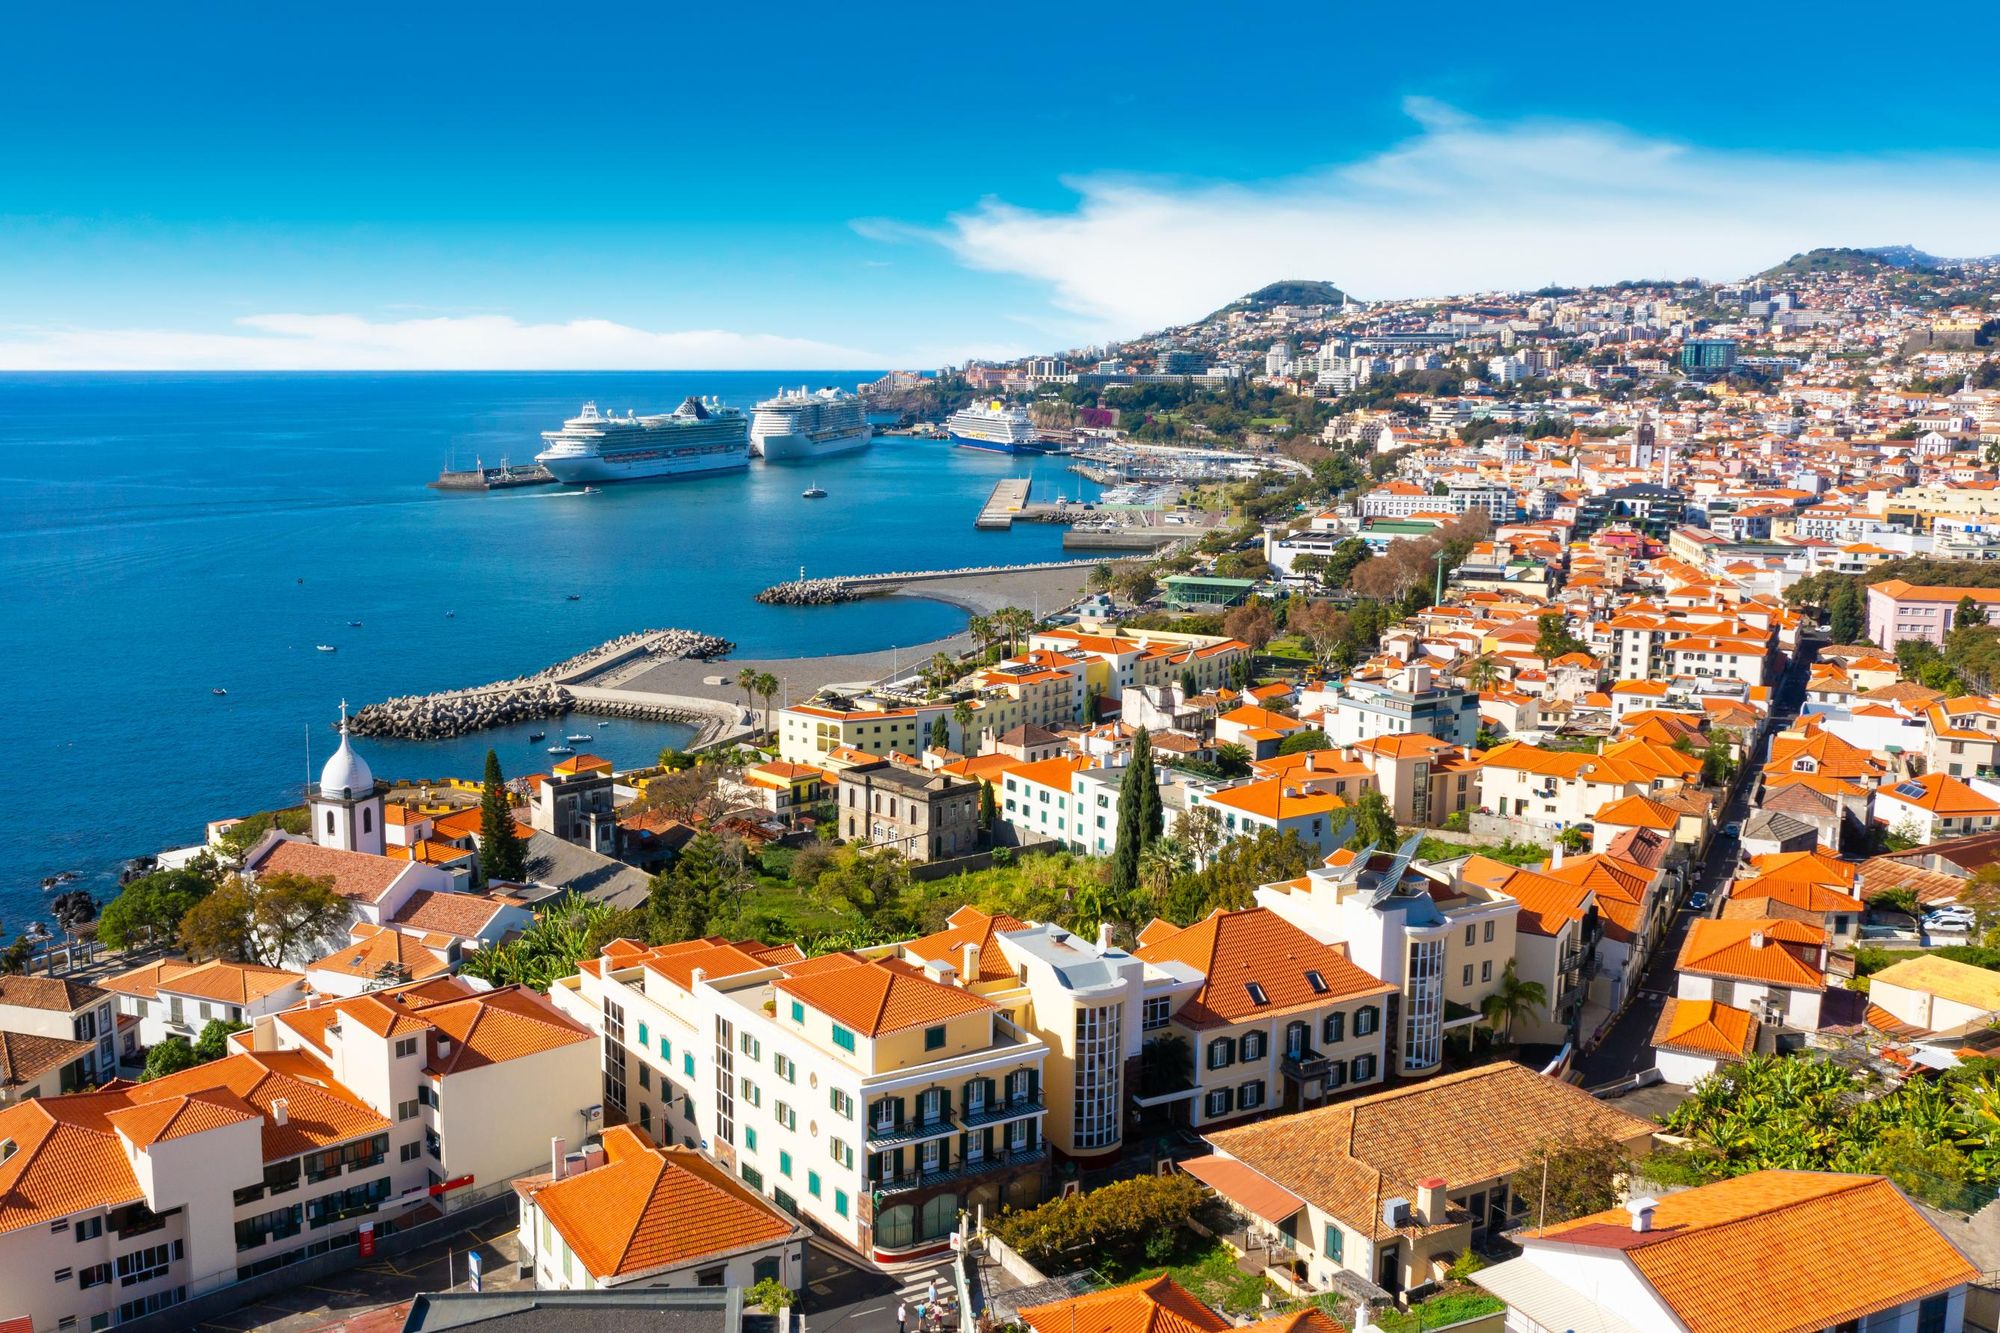 The city of Funchal. Photo: Getty